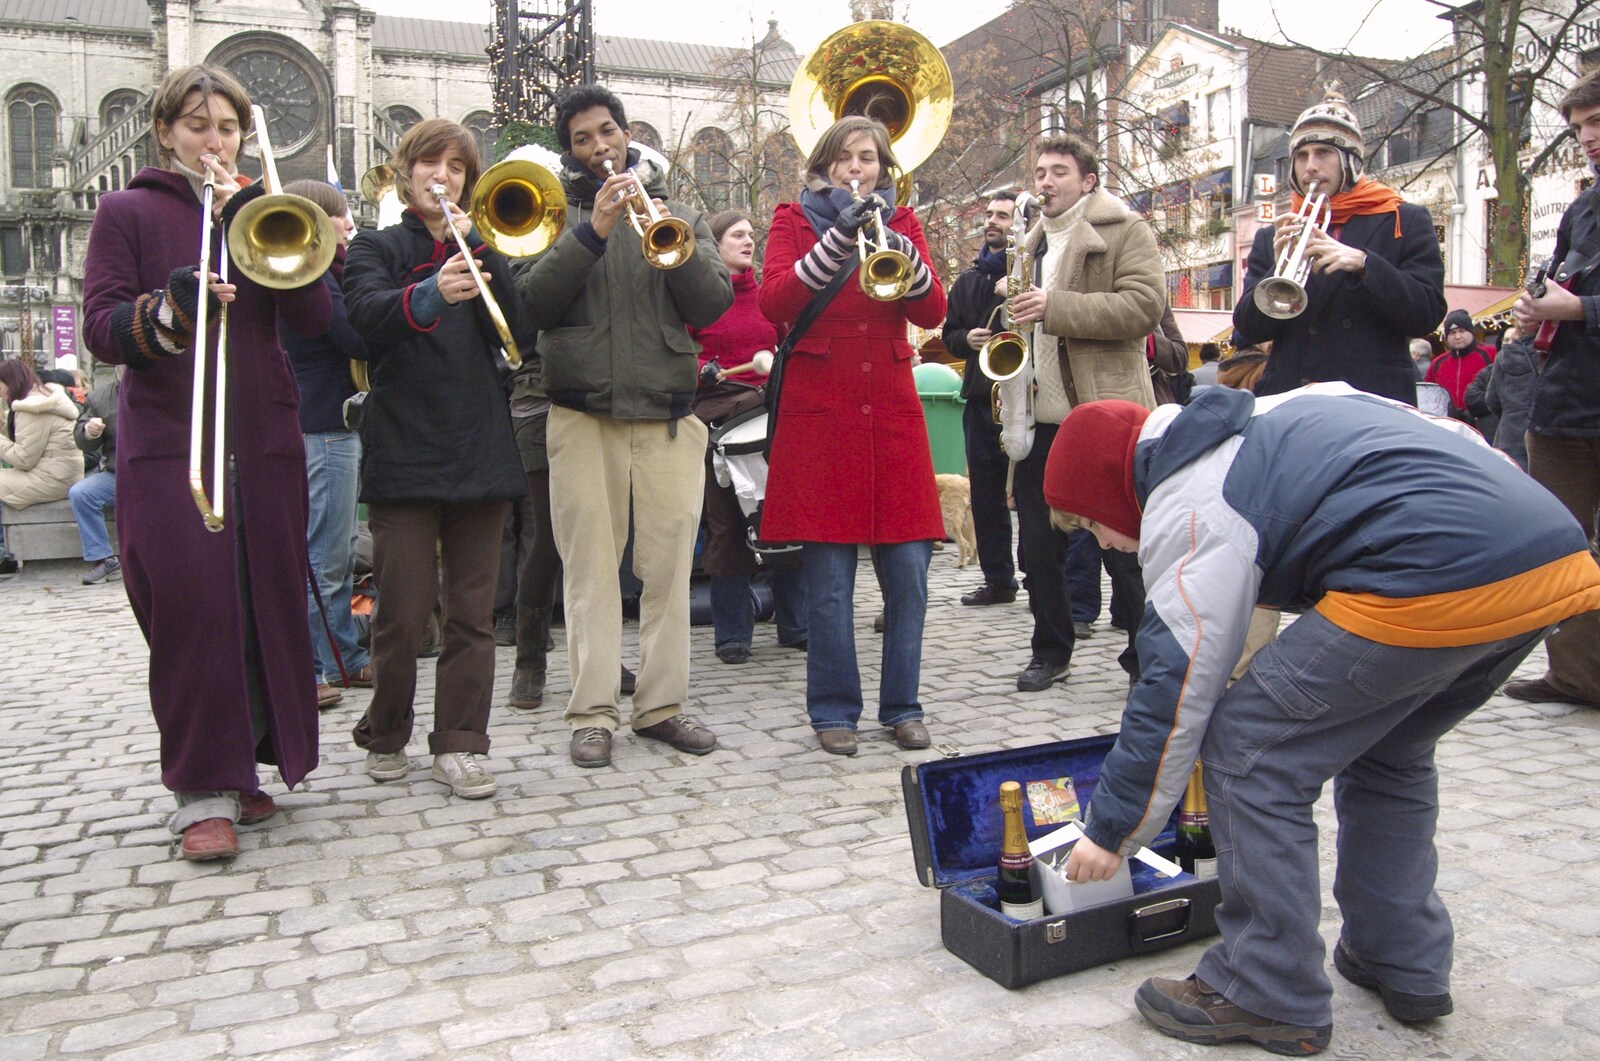 A busking brass band from The Christmas Markets of Brussels, Belgium - 1st January 2007